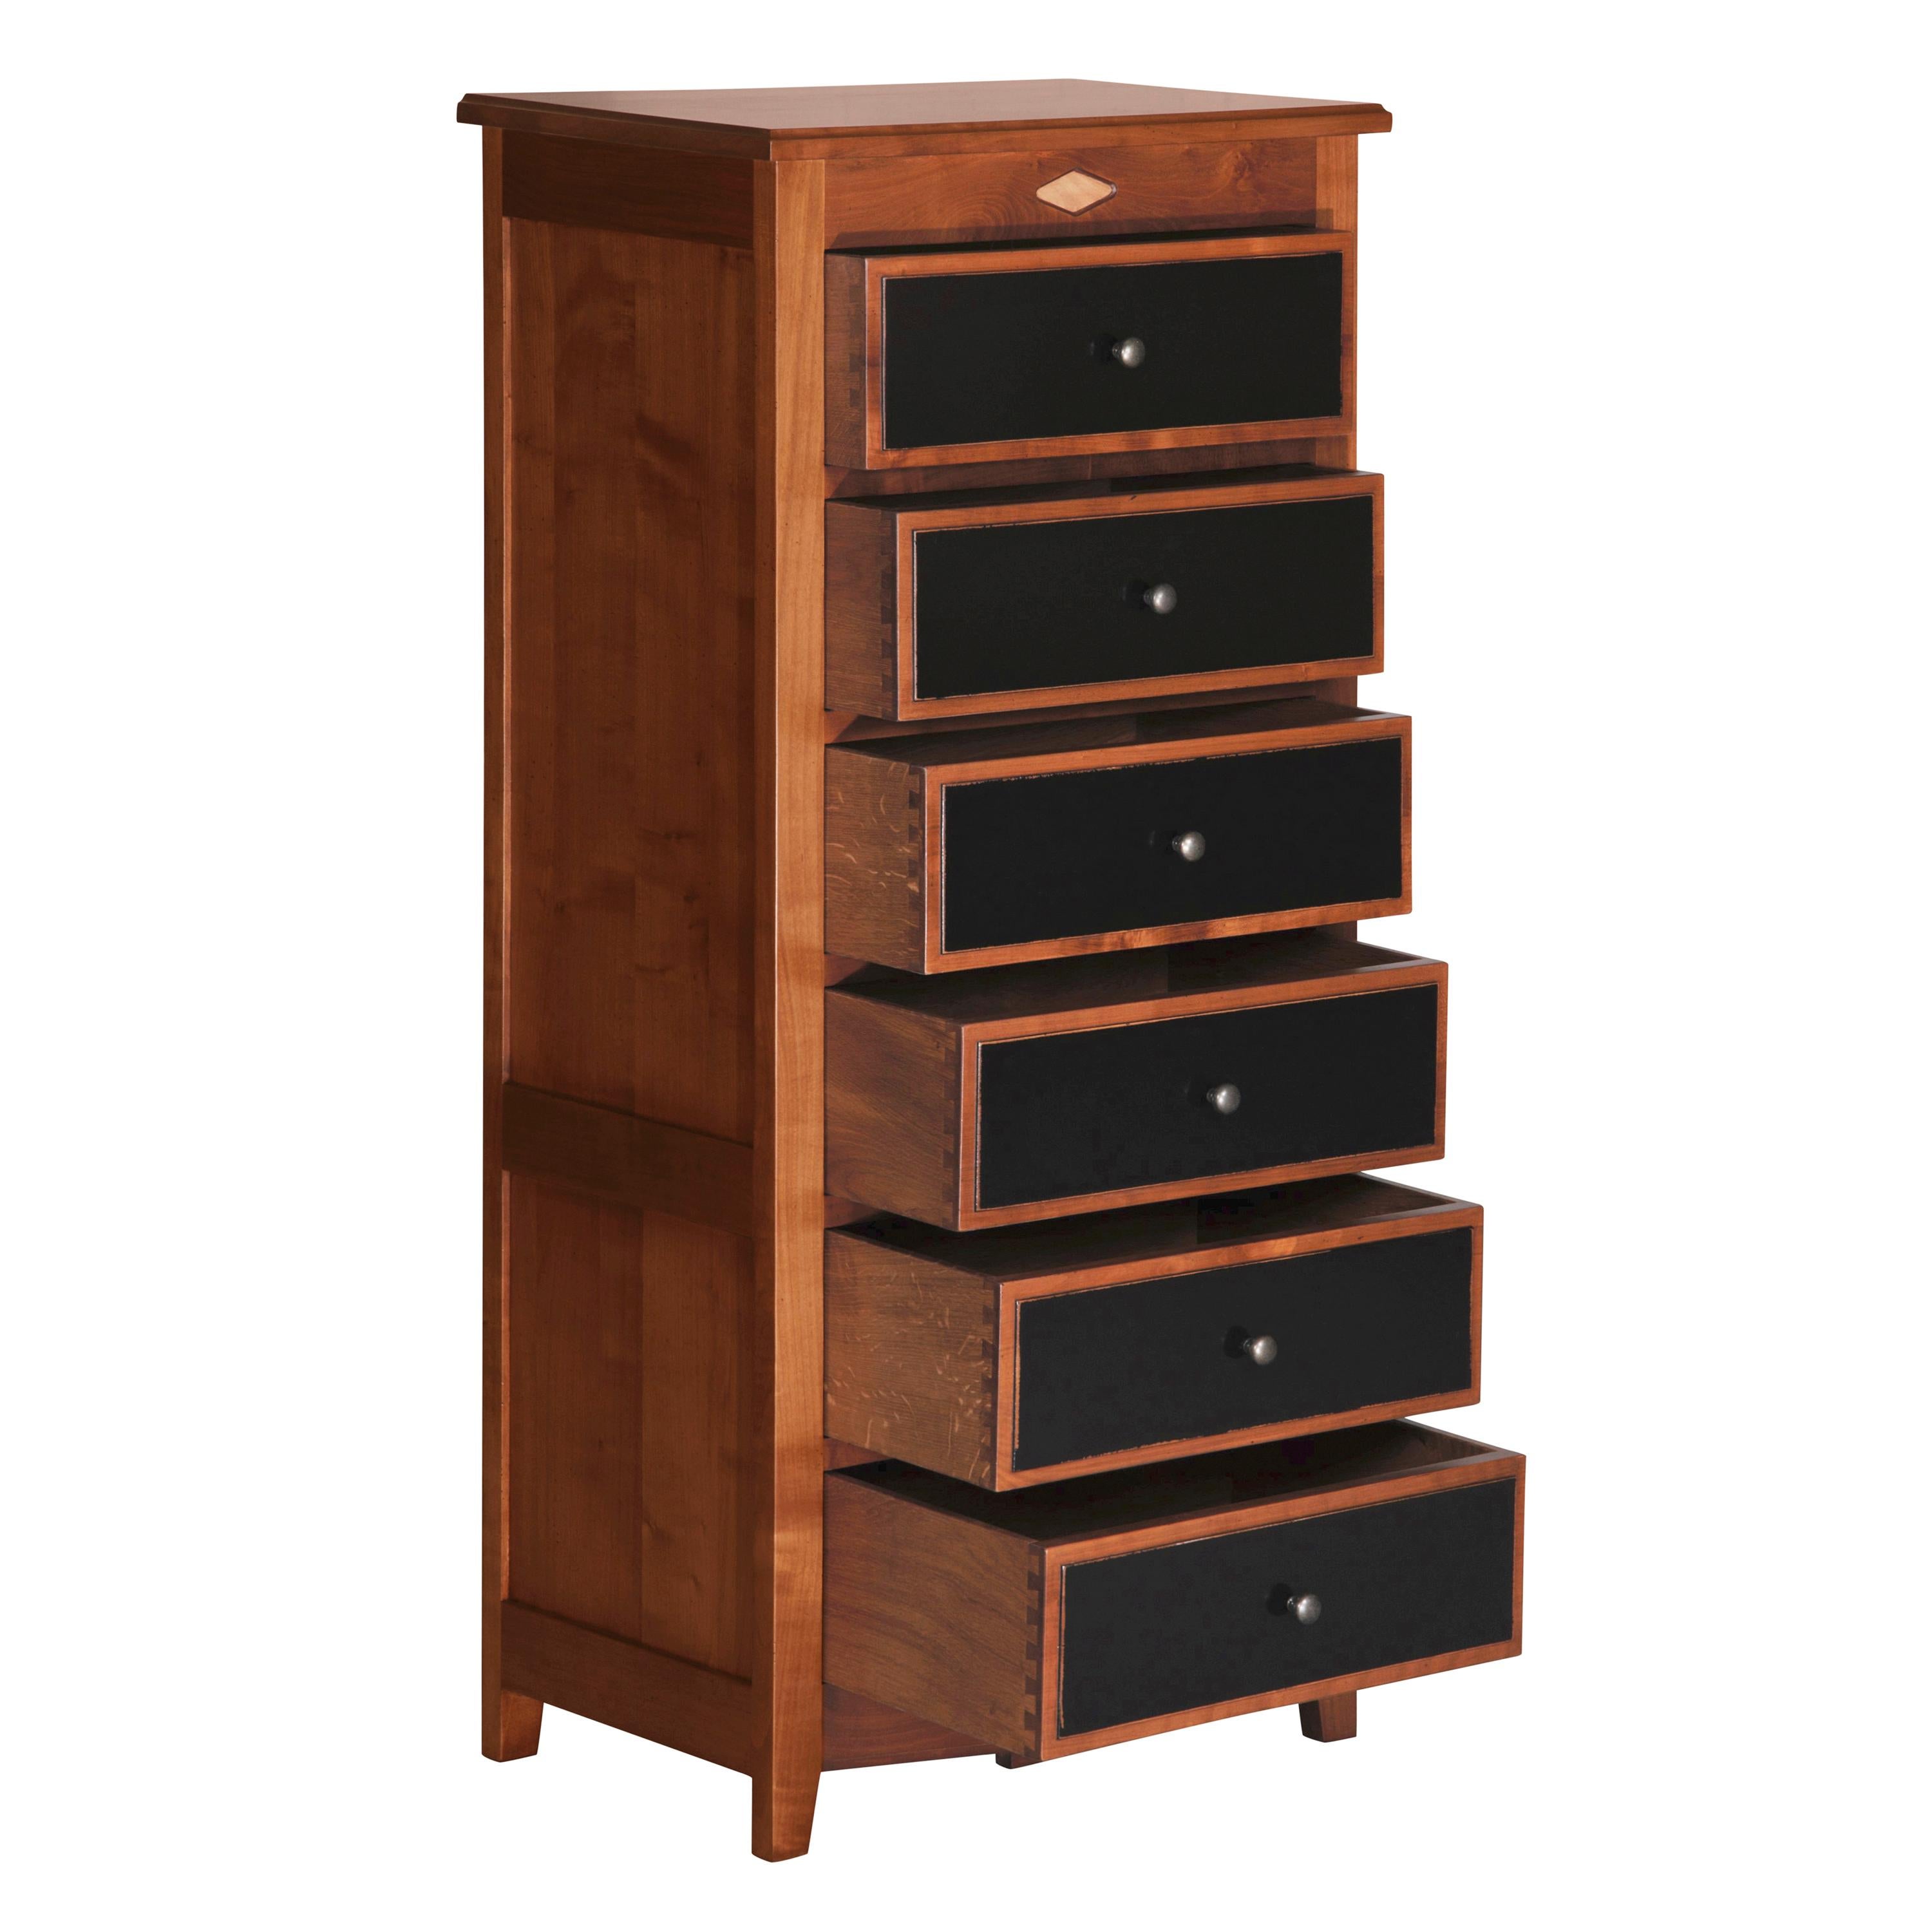 This chiffonnier or 6-drawer chest belongs to our Melaine collection that proposes handcraft modernized reinterpretated pieces of furniture from the French Directoire style at the end of the 18th century. This period was remarkable with its